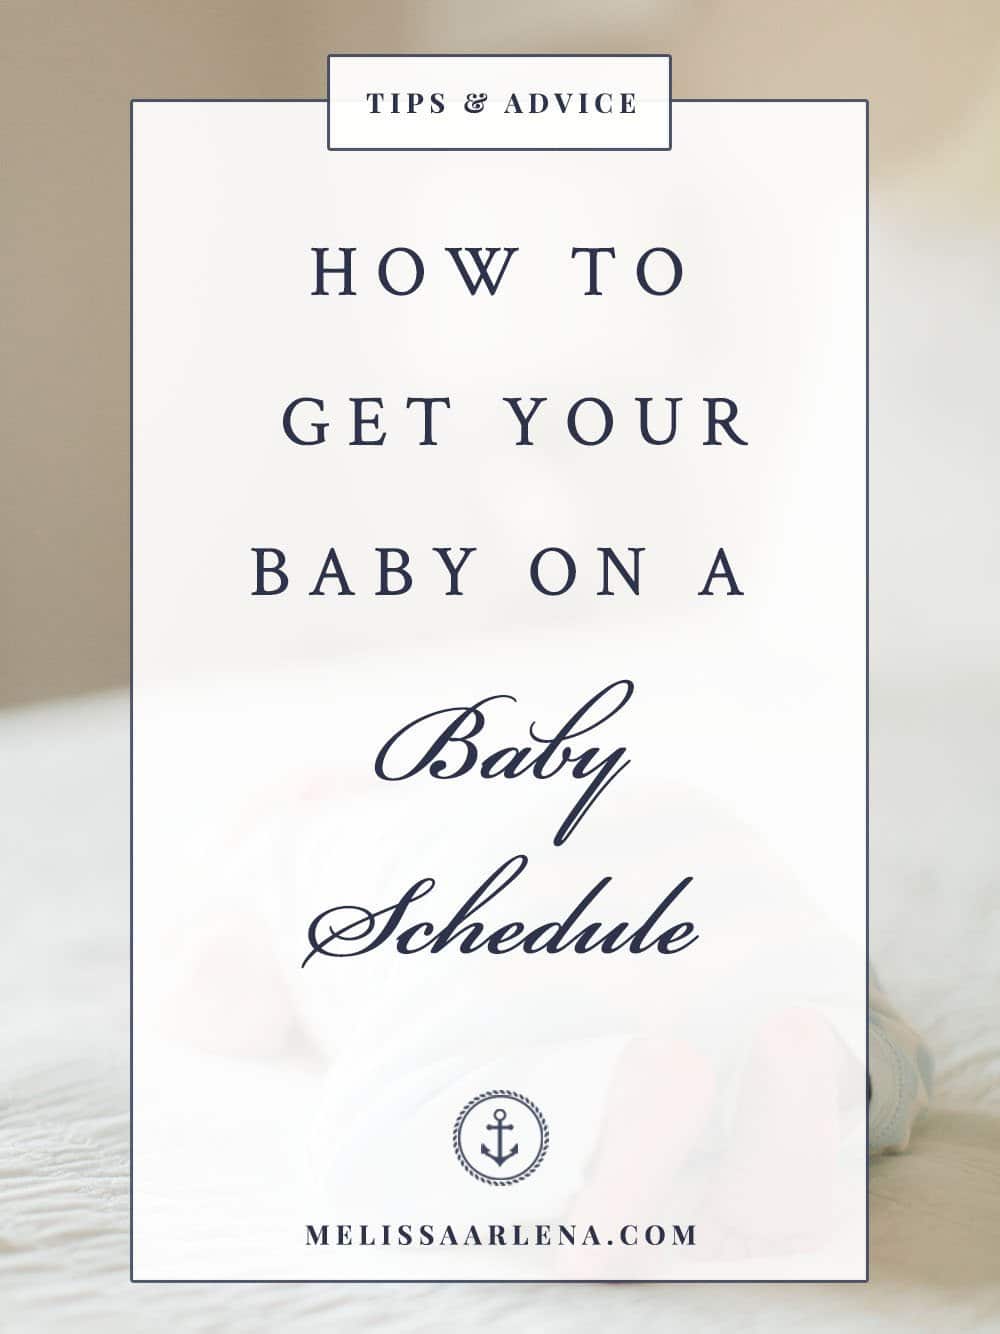 How to Use a Baby Schedule So You Can Get Some Sleep - Melissa Arlena Photography